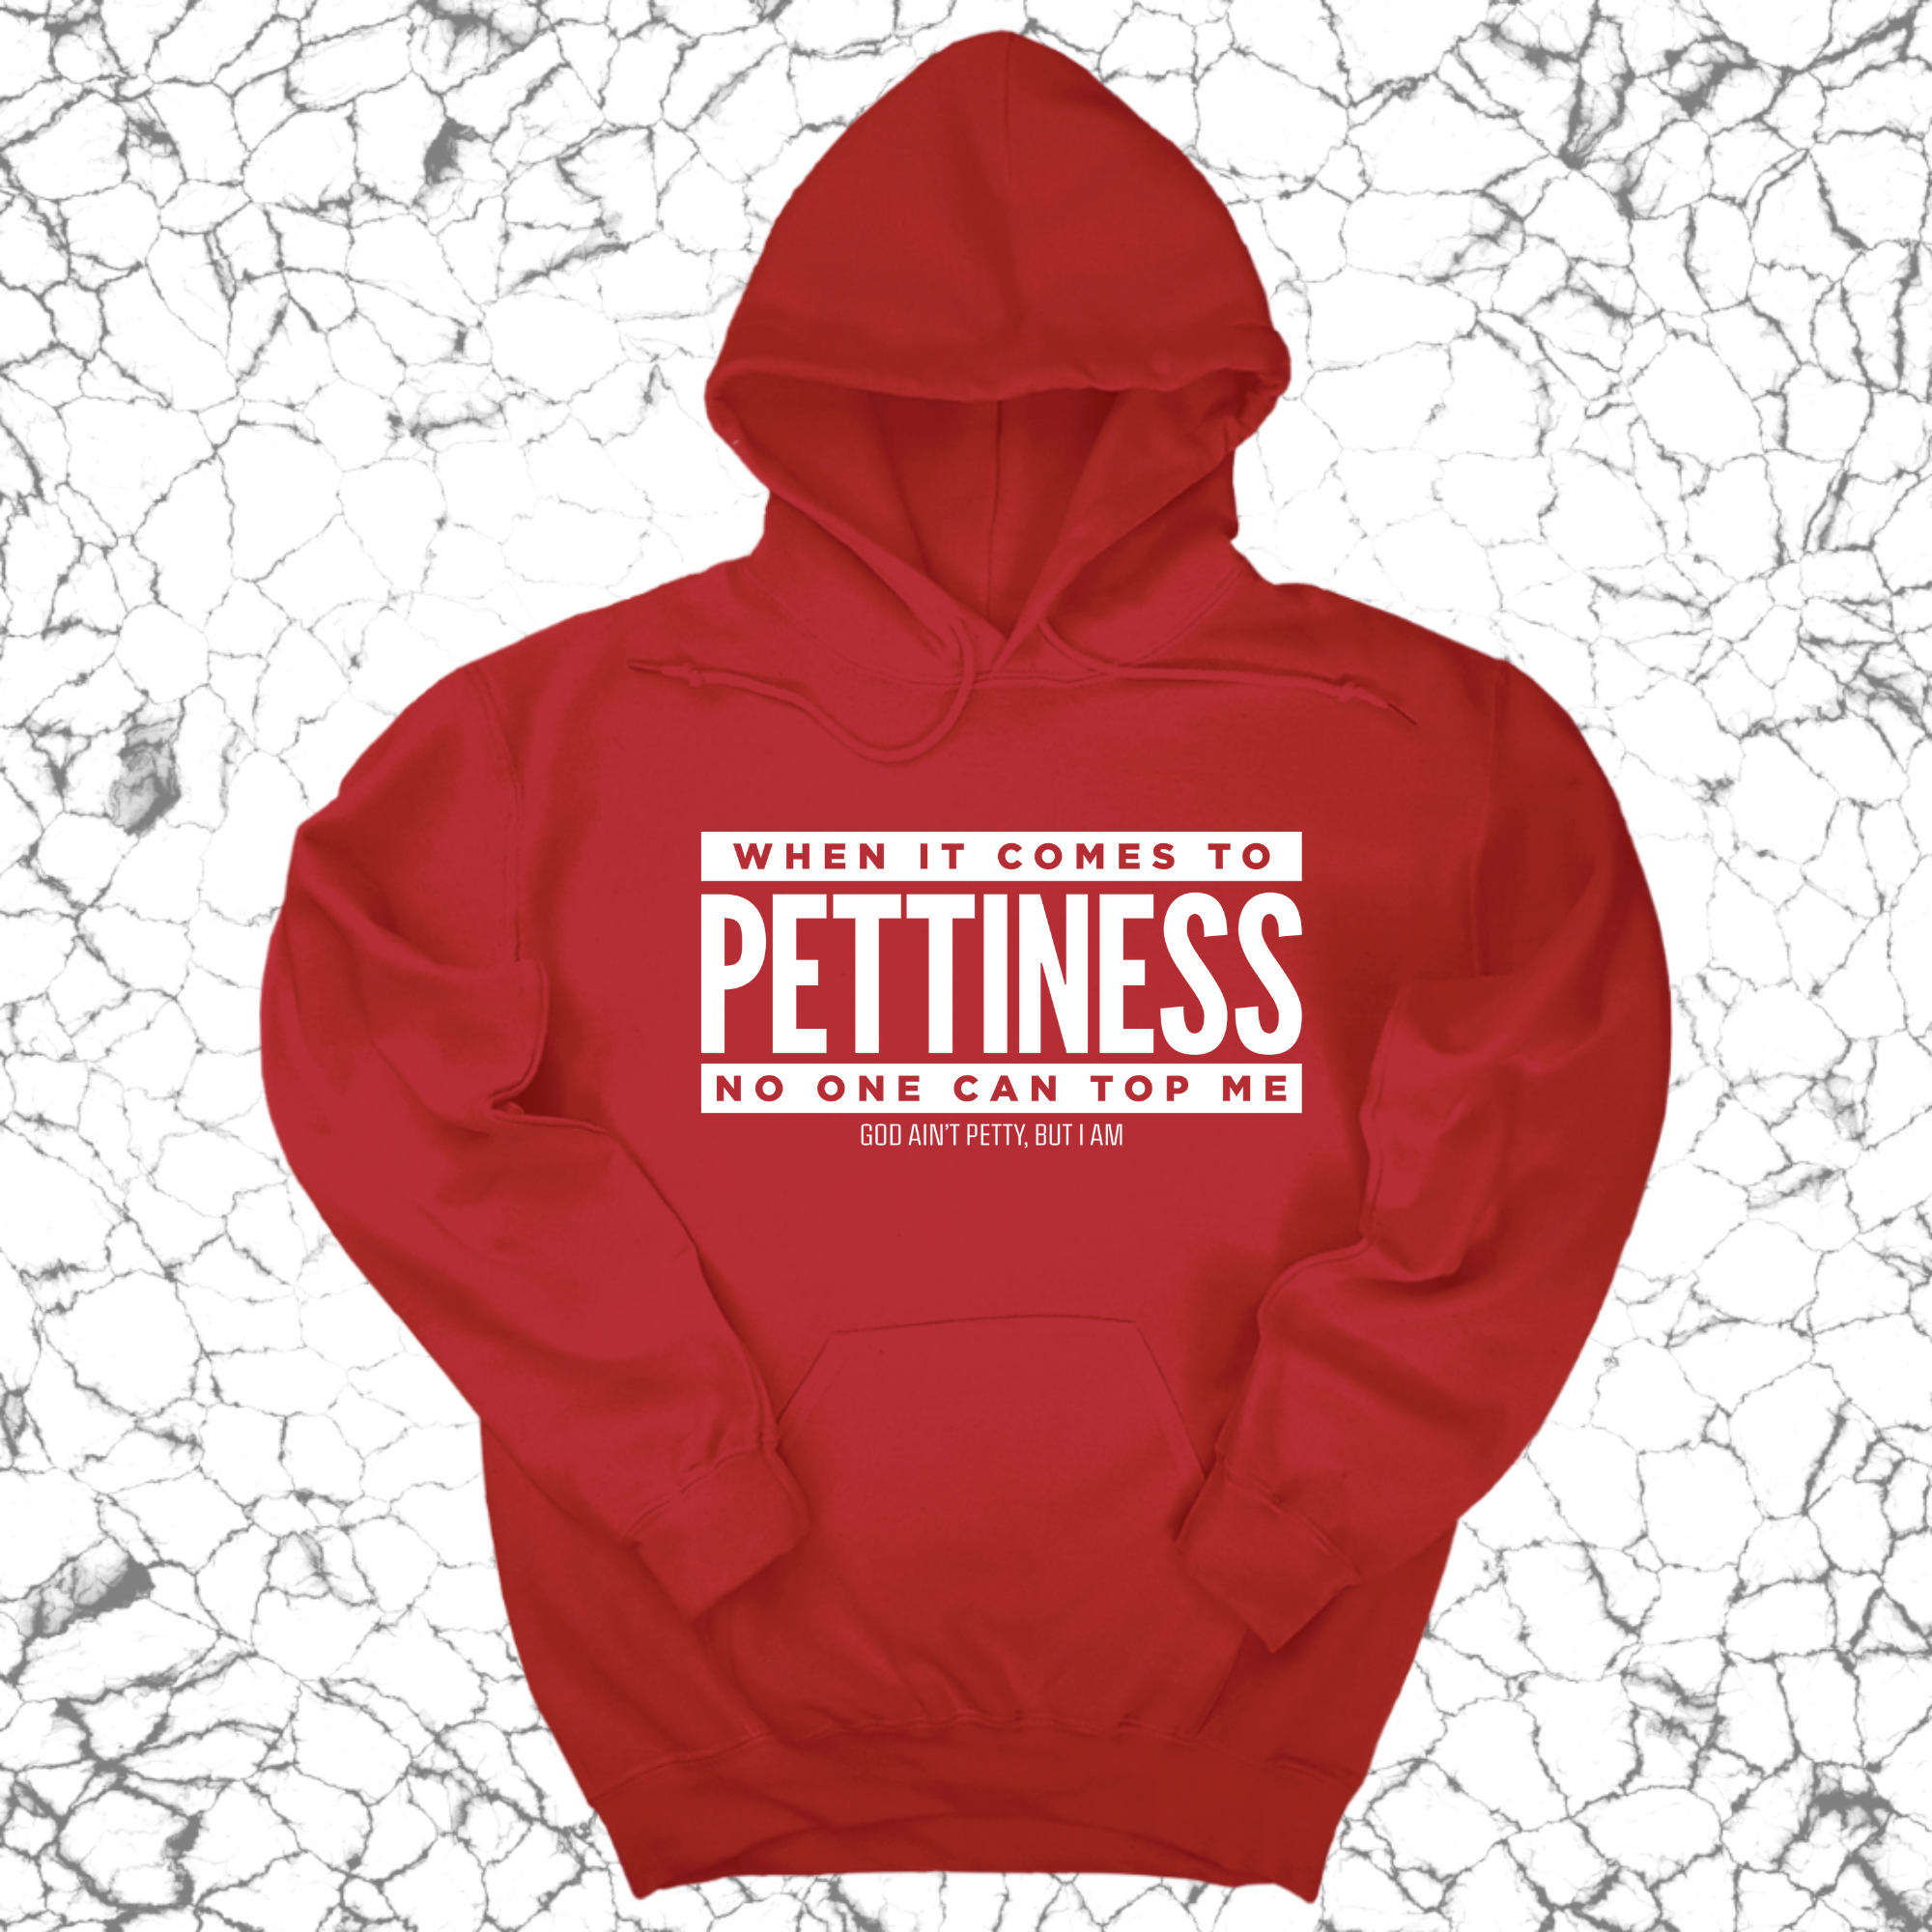 When it comes to Pettiness no one can top me Unisex Hoodie-Hoodie-The Original God Ain't Petty But I Am